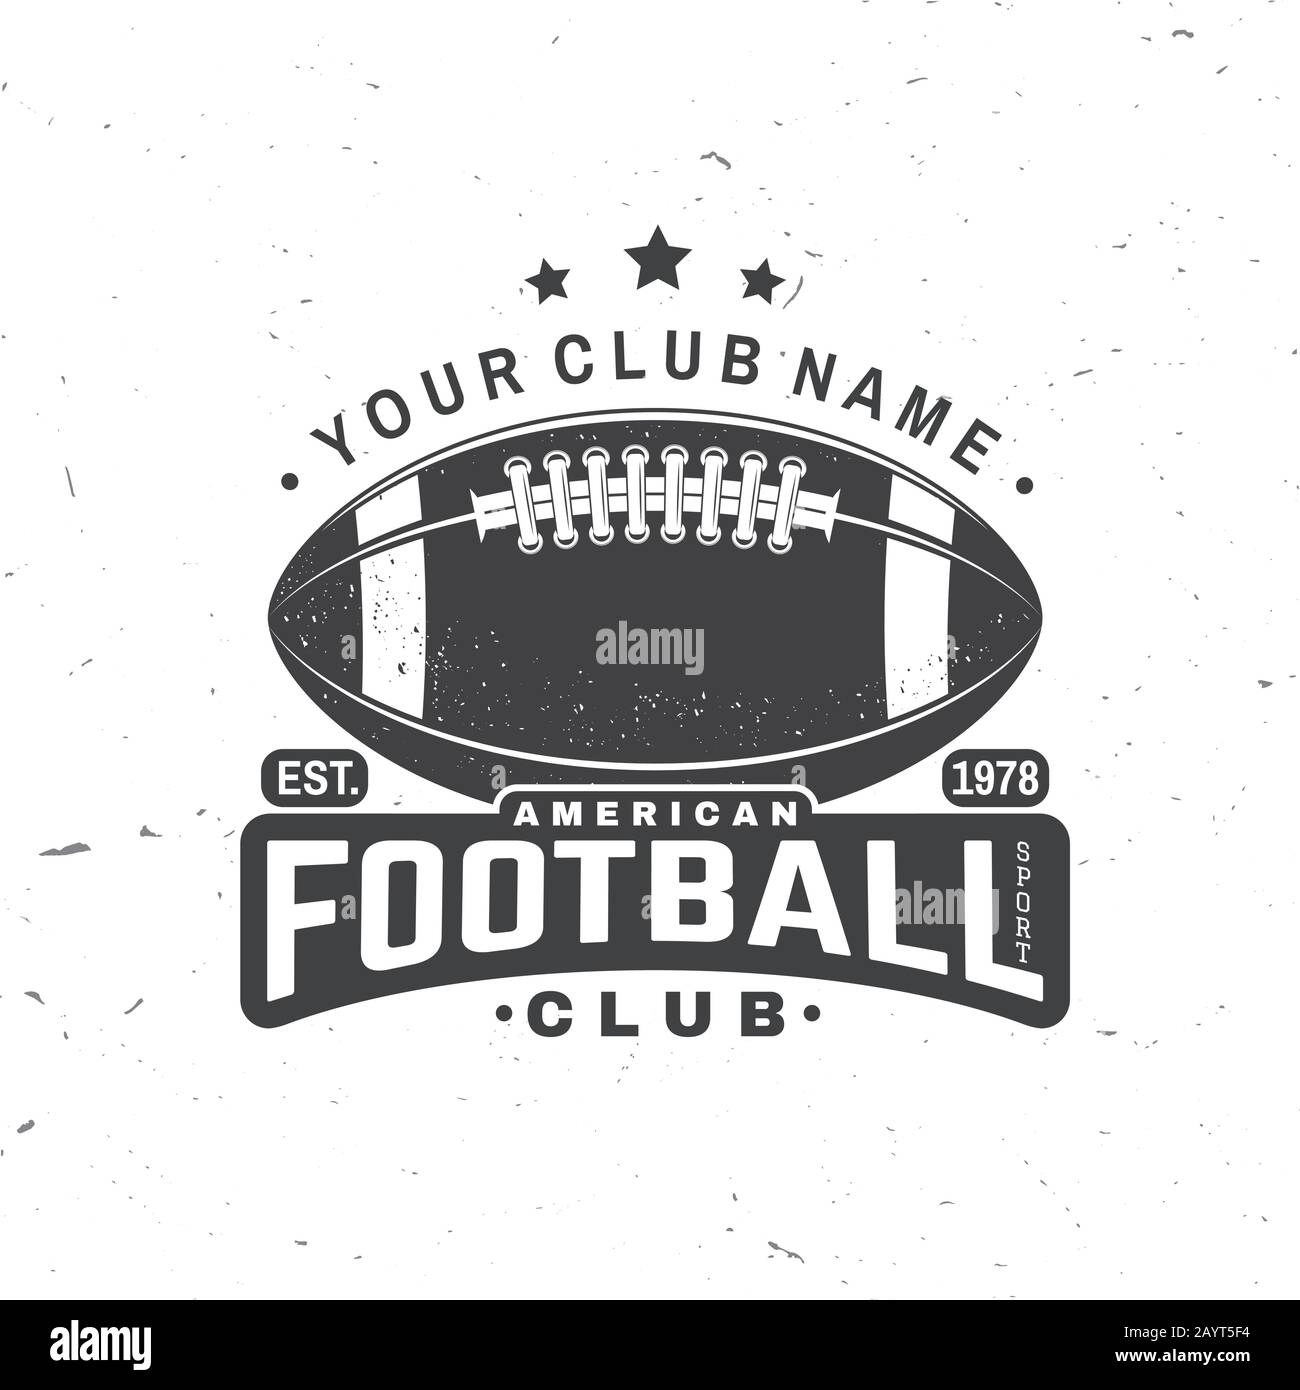 American football or rugby club badge. Vector illustration. Concept for shirt, logo, print, stamp, tee, patch. Vintage typography design with american football ball silhouette Stock Vector